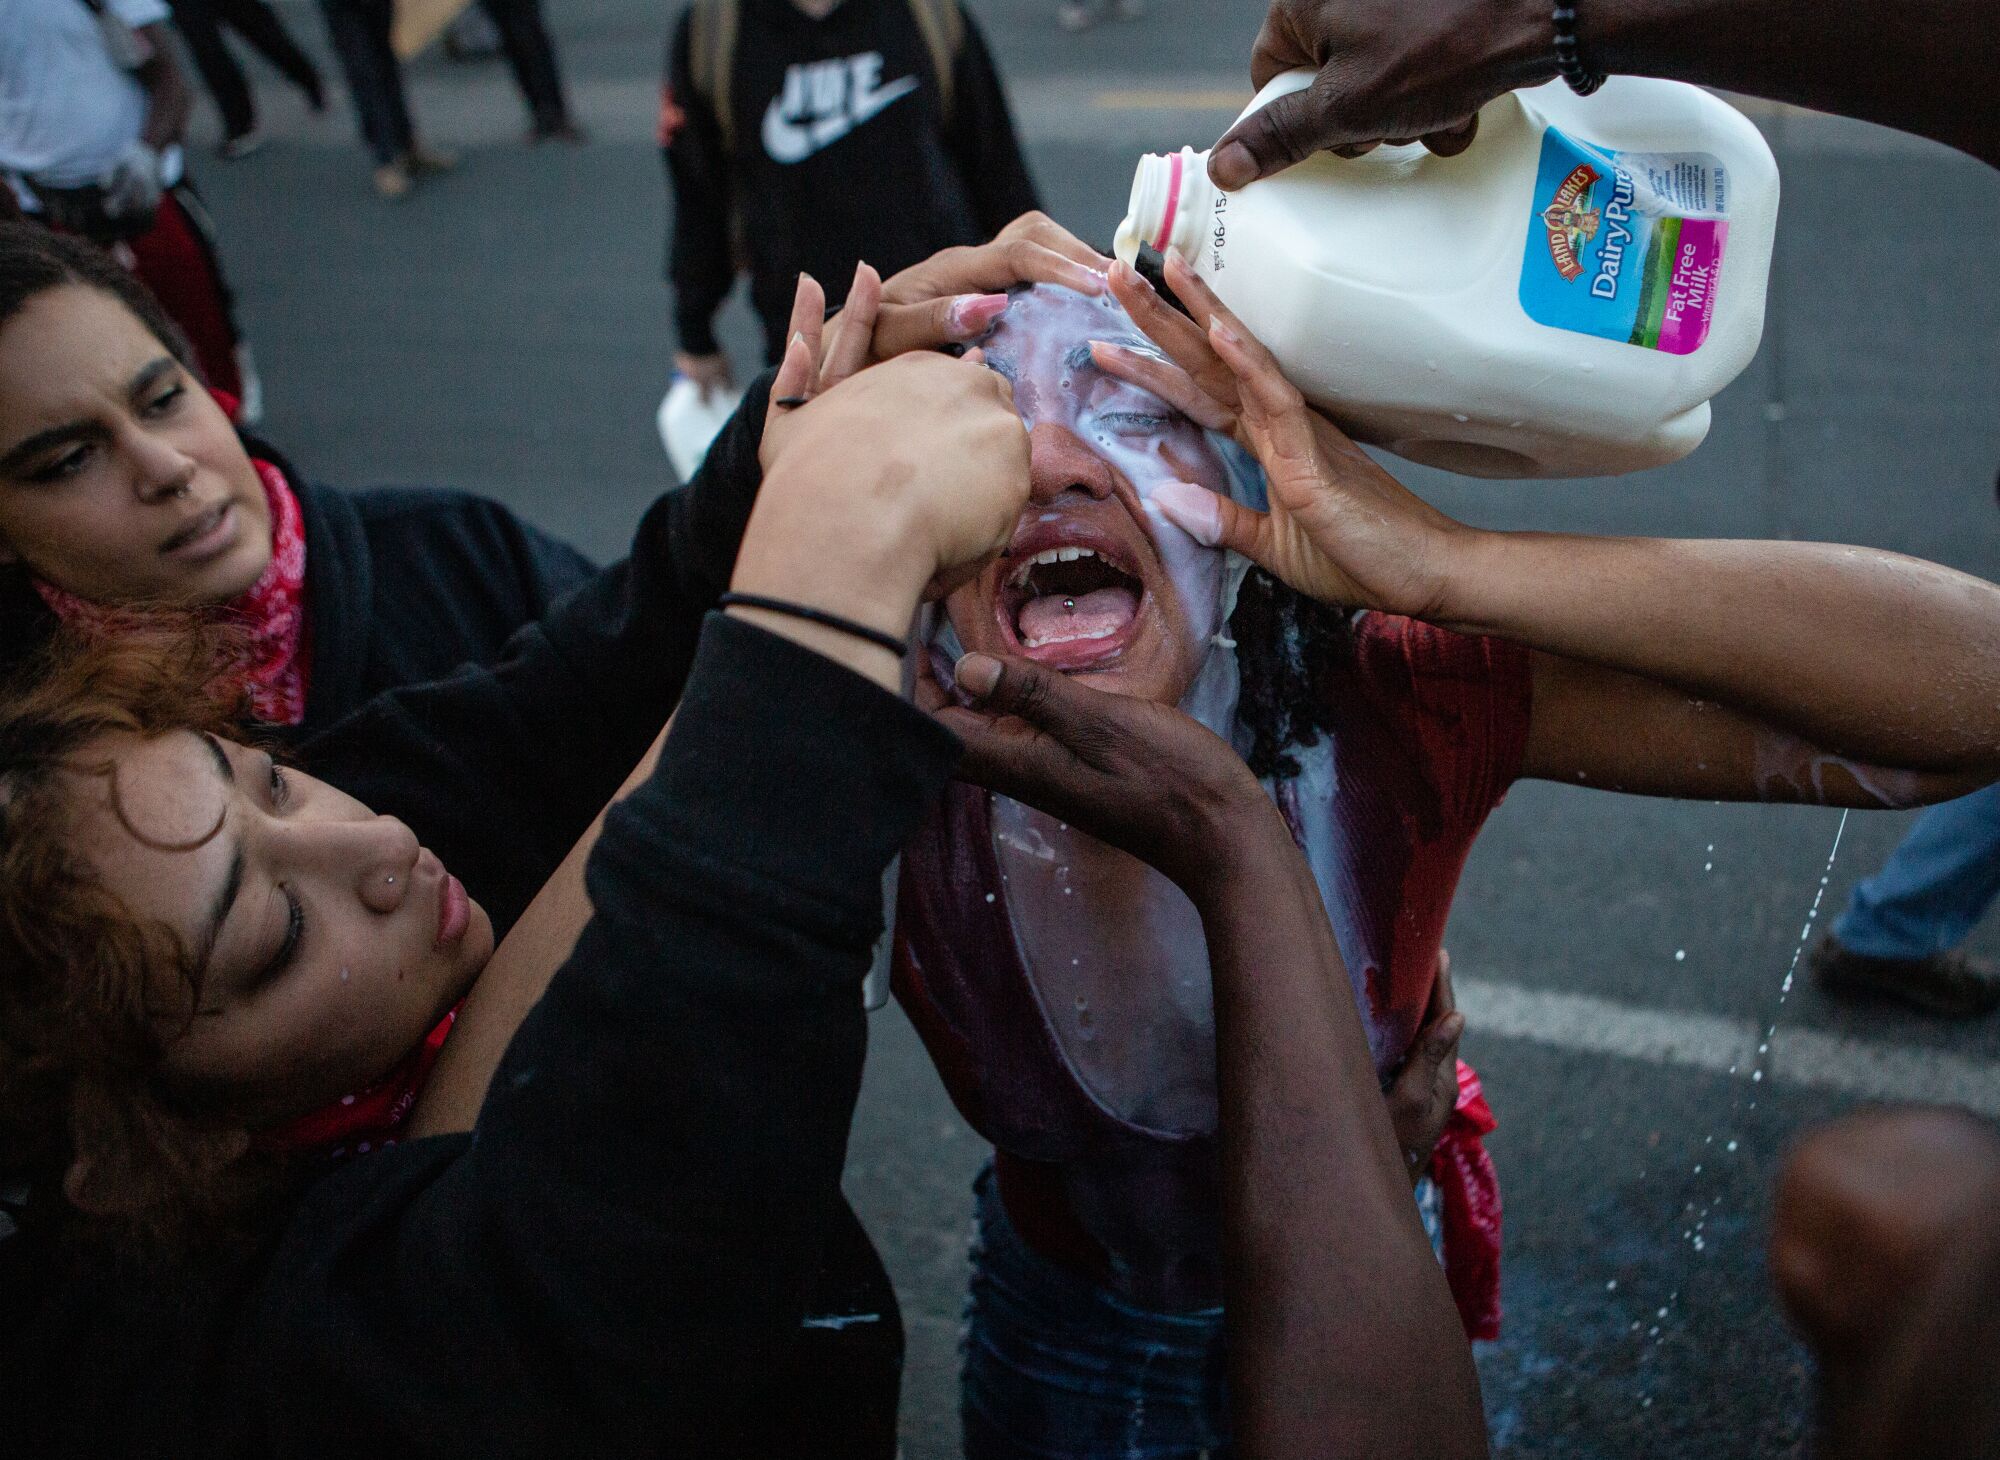 Two people help a protester, pouring milk over her eyes as she cries out.